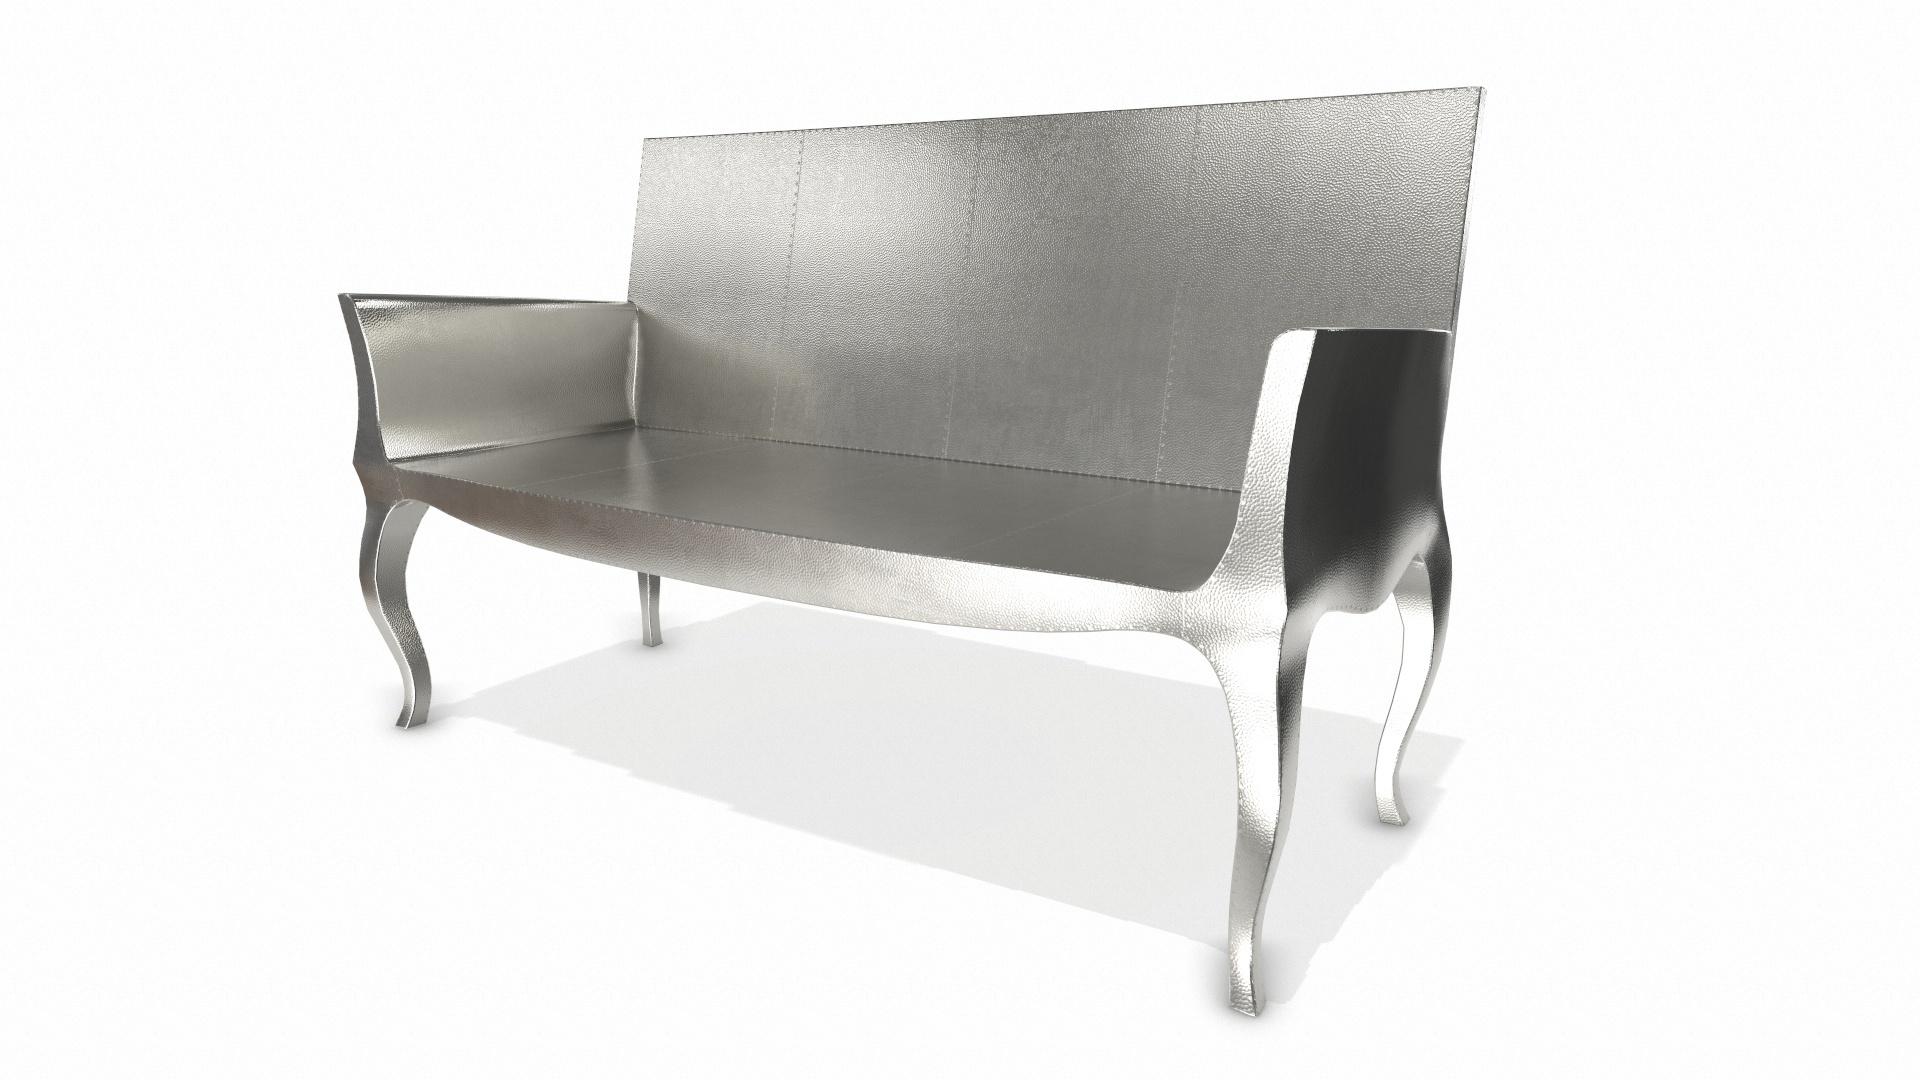 American Louise Settee Art Deco Canapes in Mid. Hammered White Bronze by Paul Mathieu For Sale